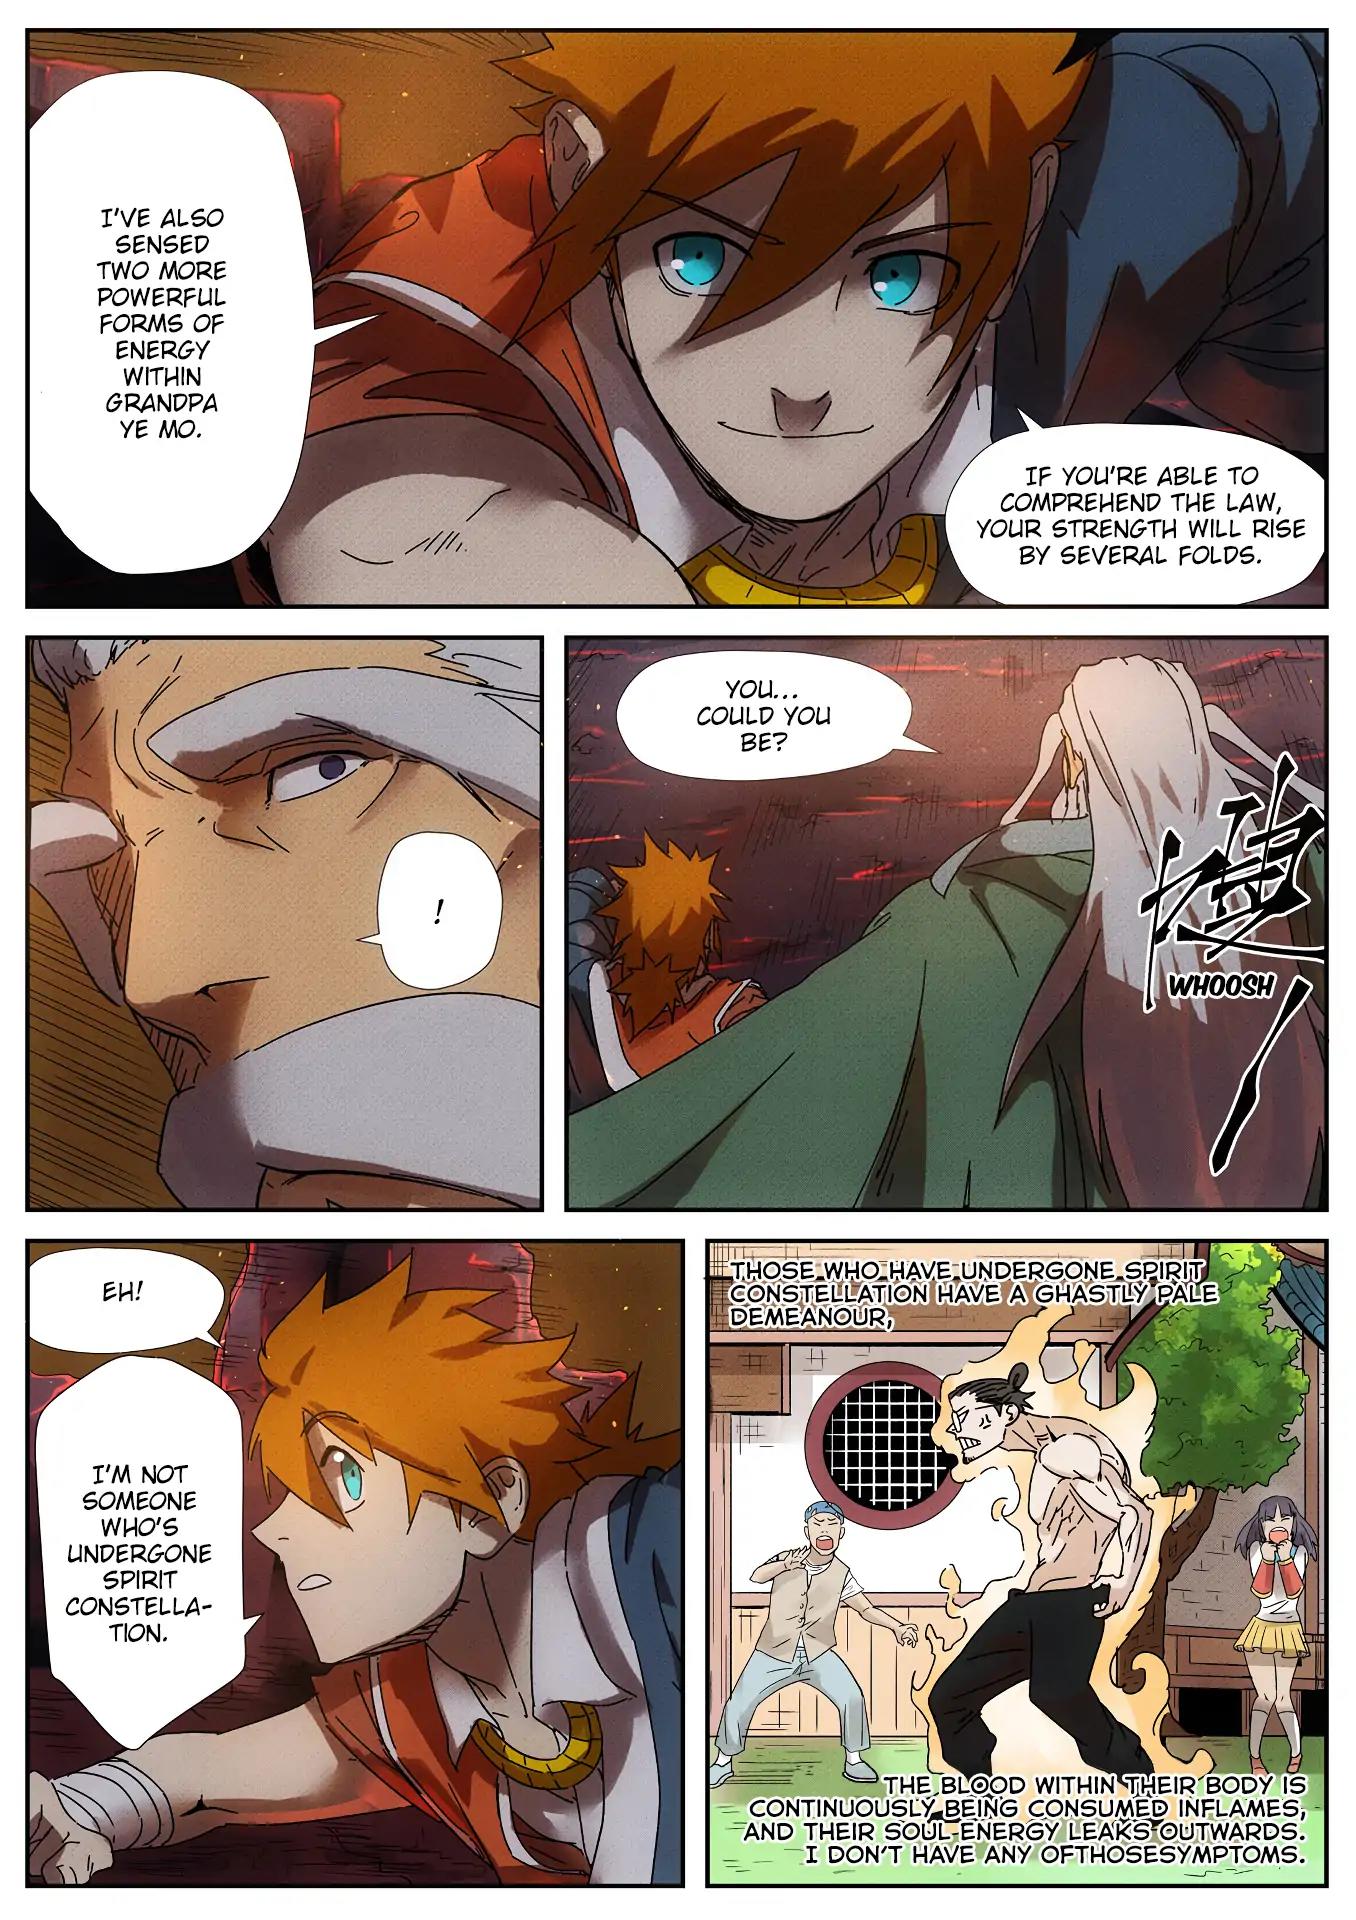 Tales of Demons and Gods Chapter 235.5: